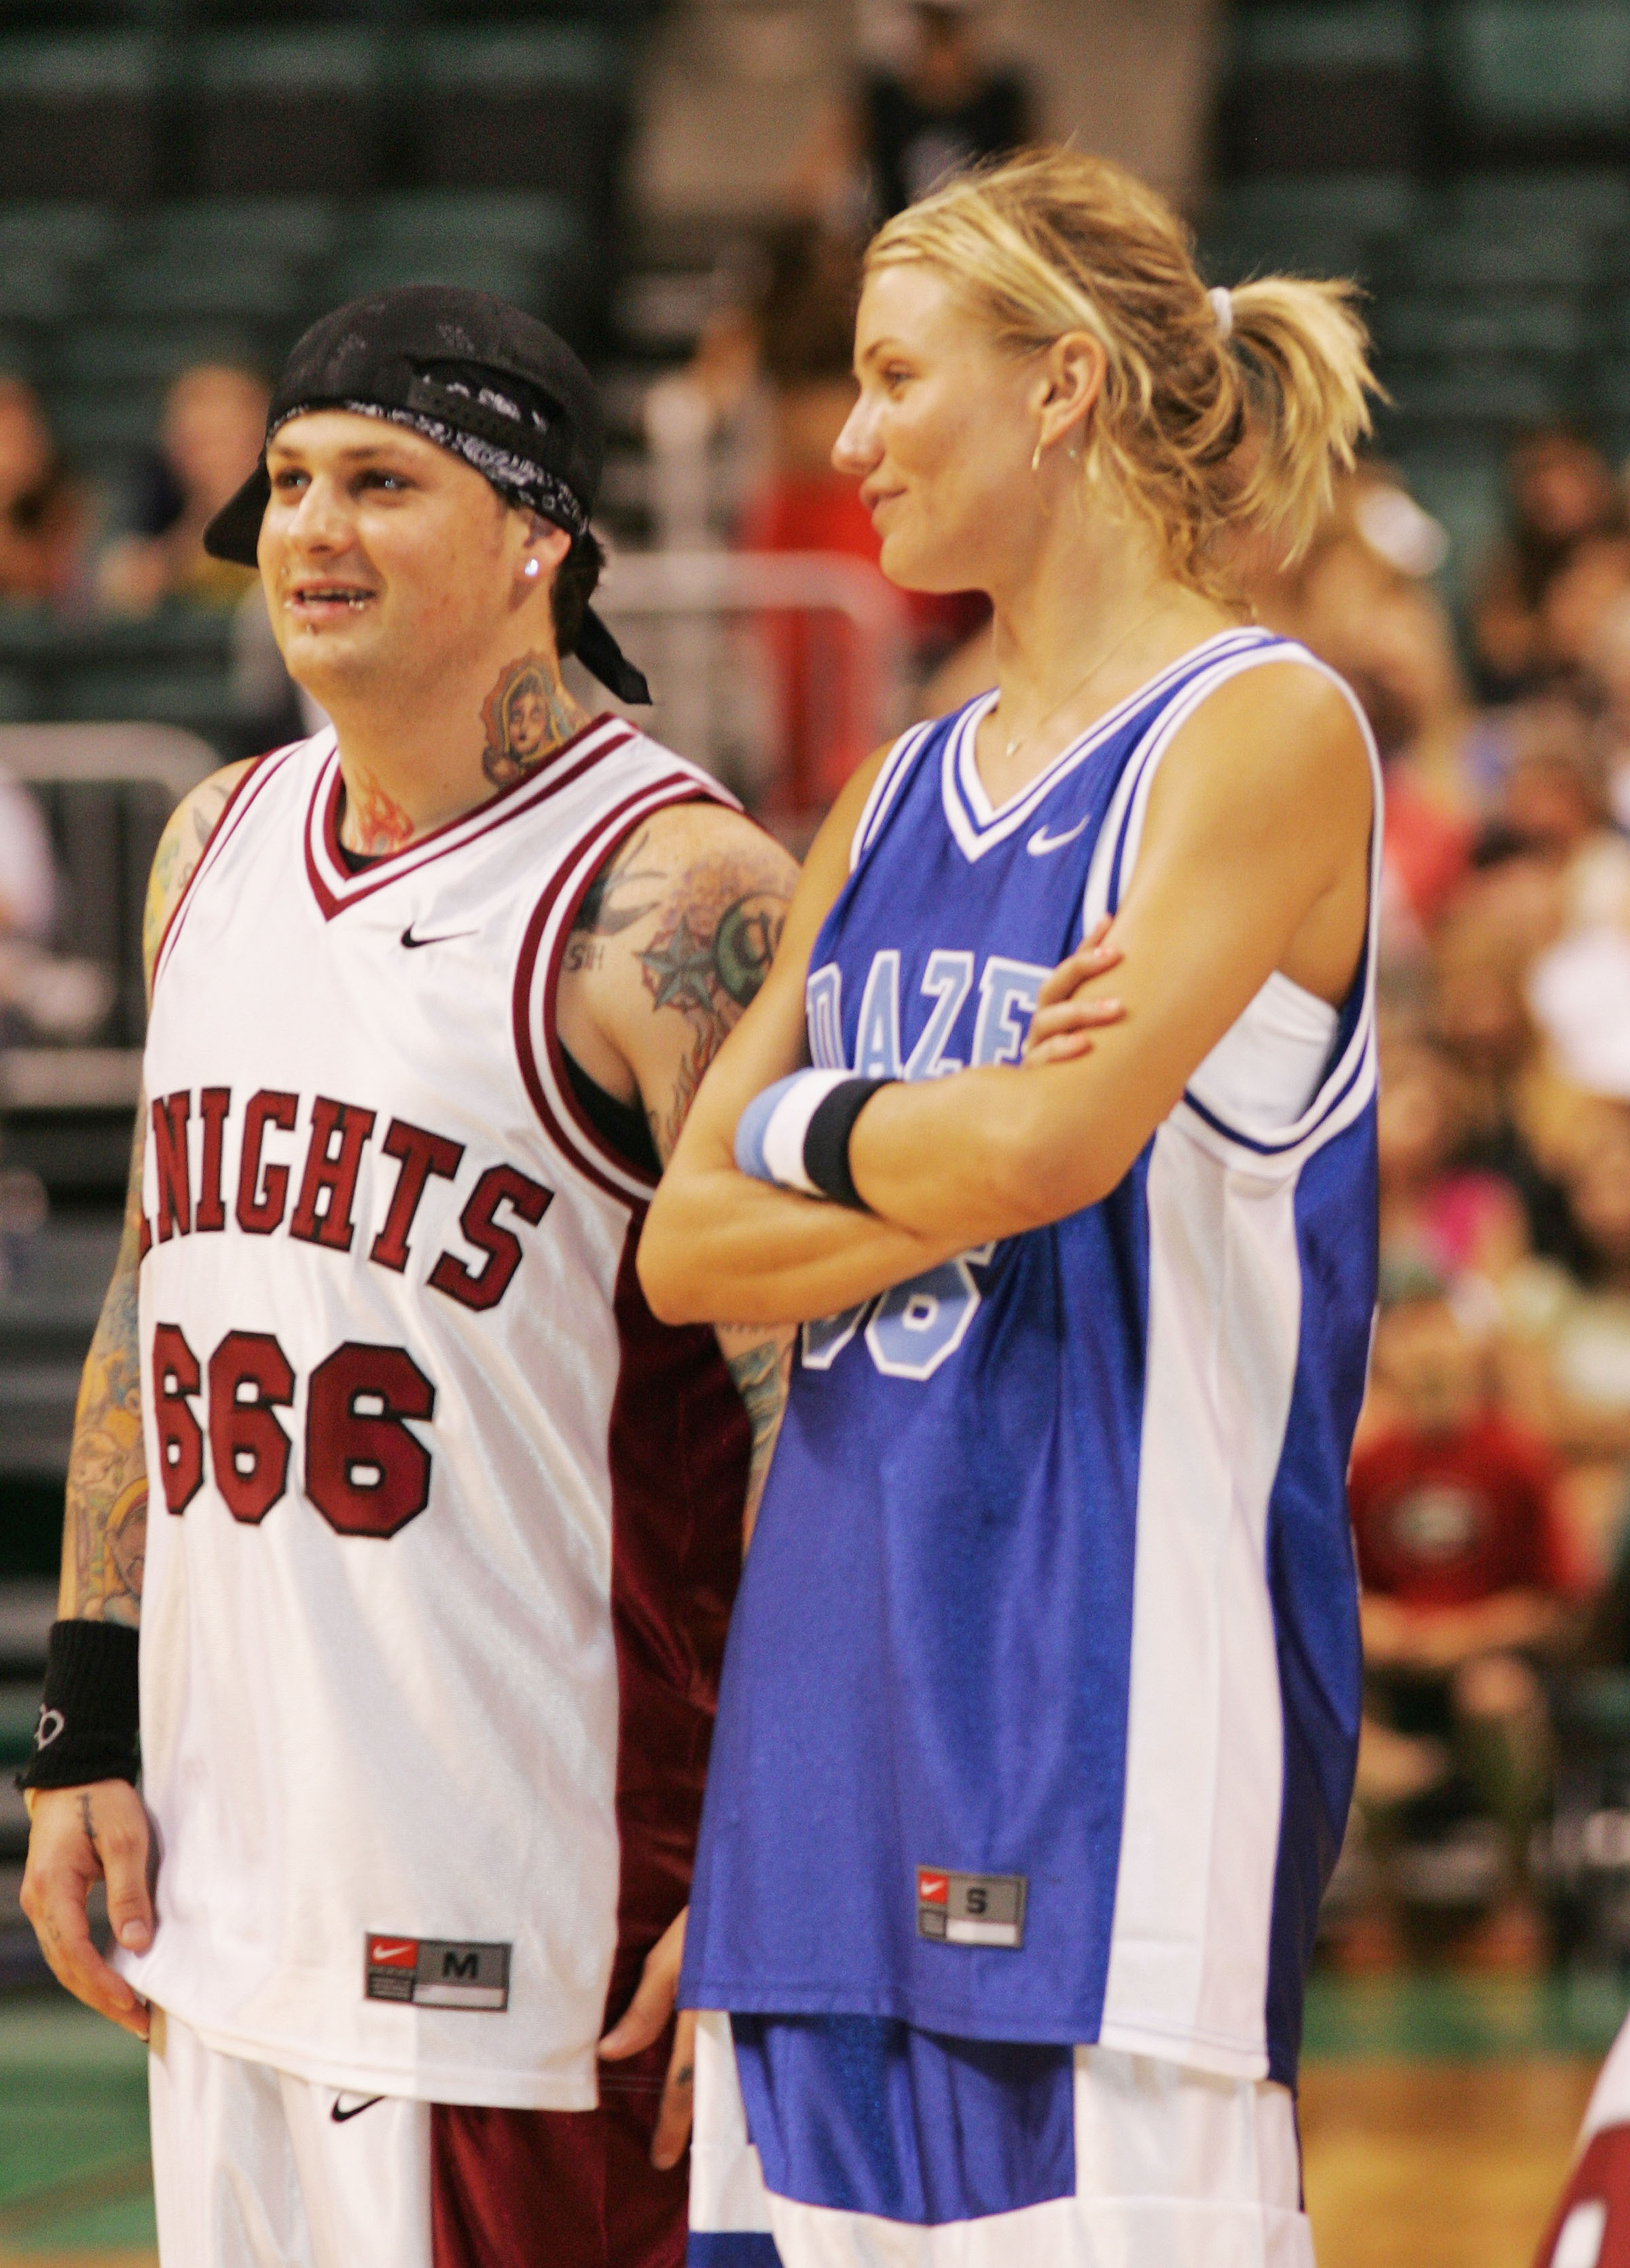 Cameron Diaz and Benji Madden during the NSYNC Challenge For The Children Celebrity Basketball Game at Office Depot Center in Sunrise, Florida on July 25, 2004. | Source: Getty Images